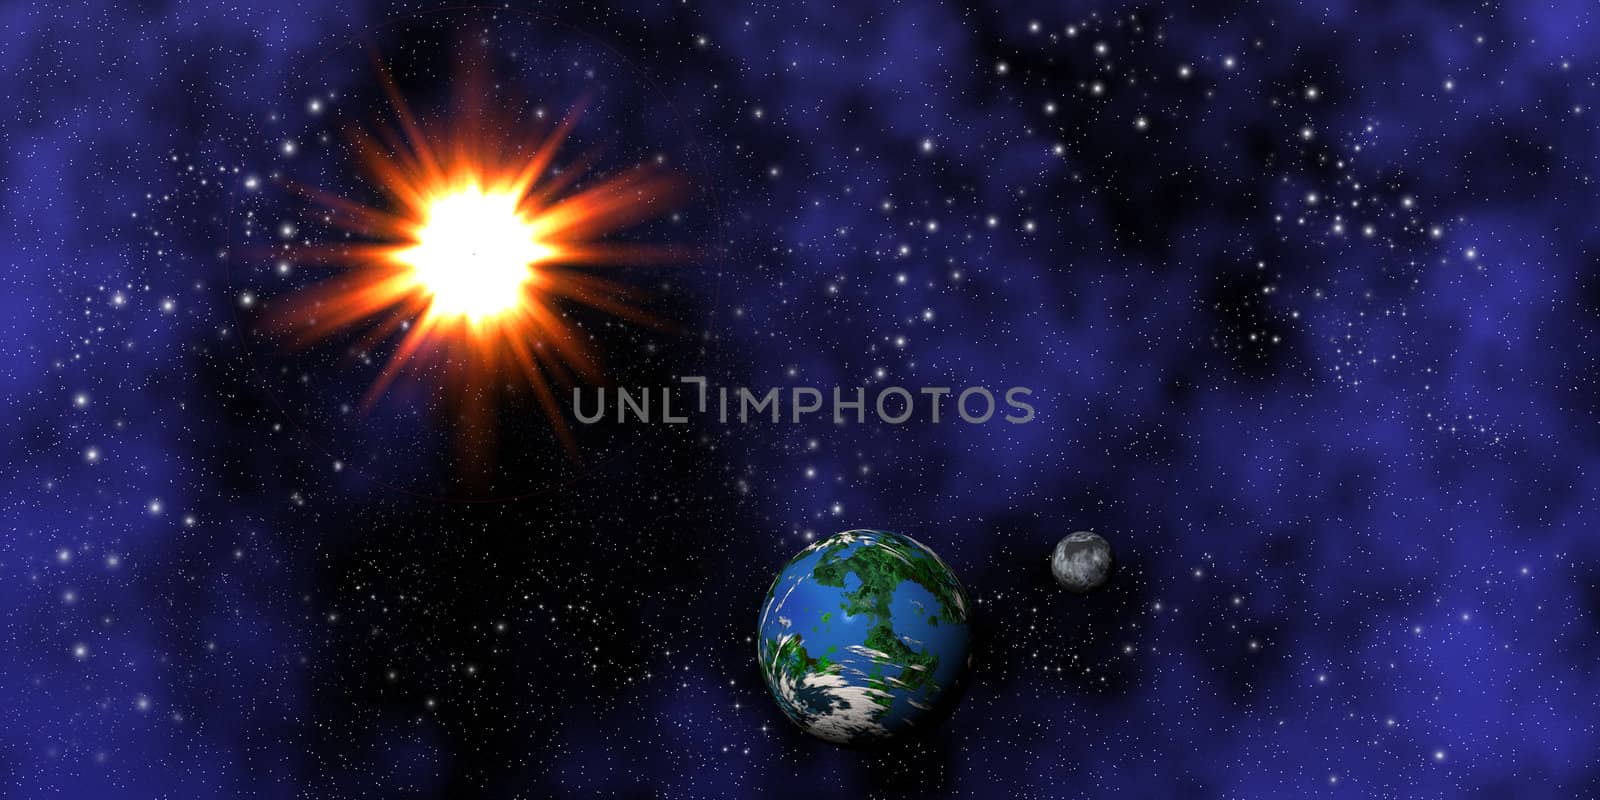 Fictional composition of the Earth, Moon and Sun